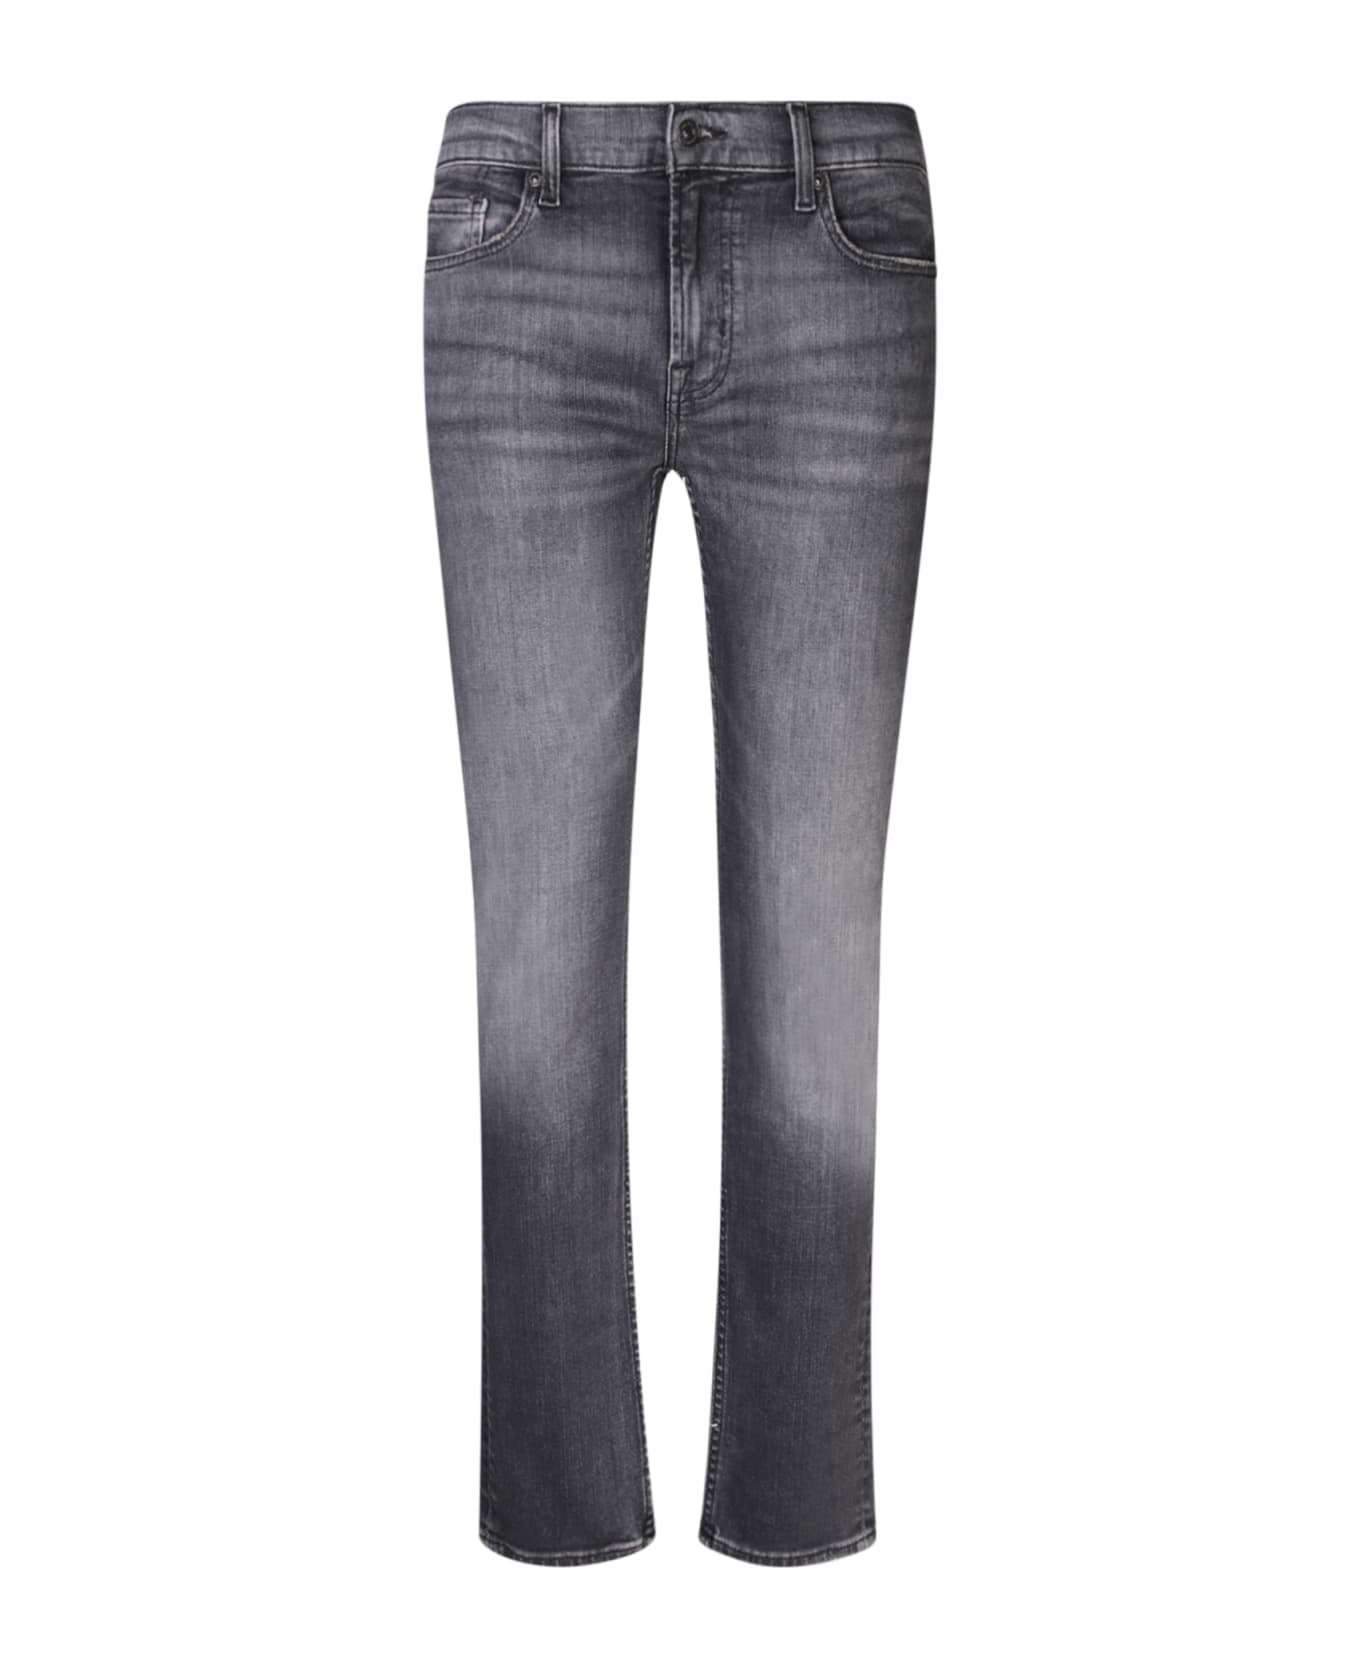 7 For All Mankind Slimmy Tapered Black Jeans - Black